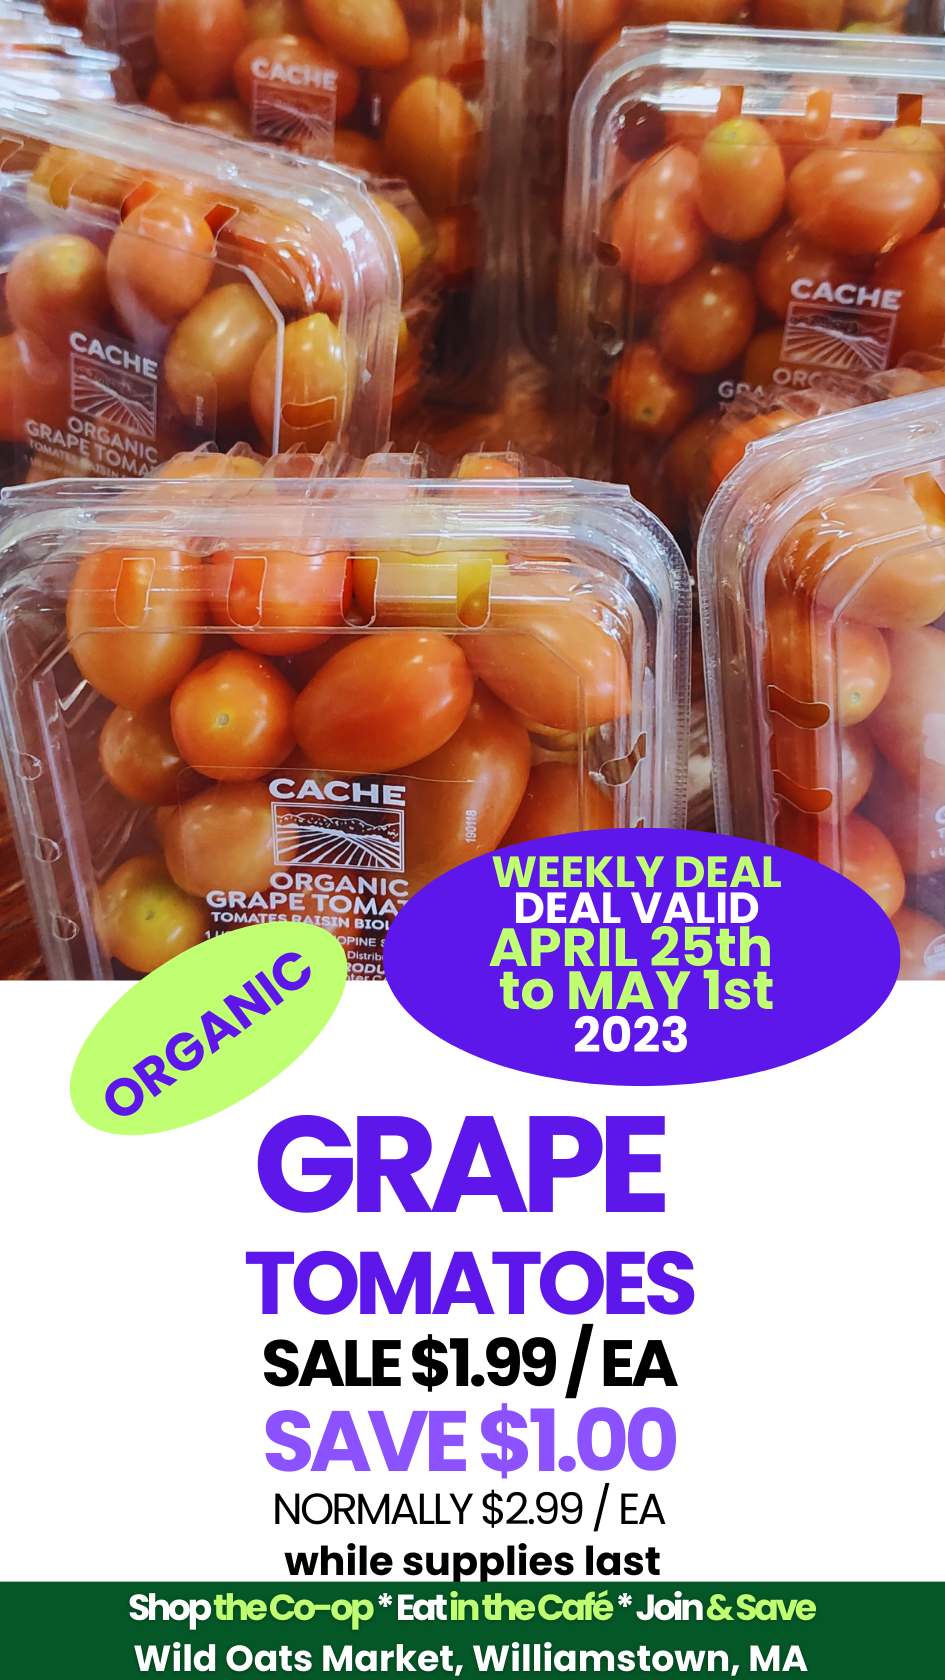 Wild Oats Market Weekly Update APR 28 to MAY ORGANIC GRAPE TOMATOES.png